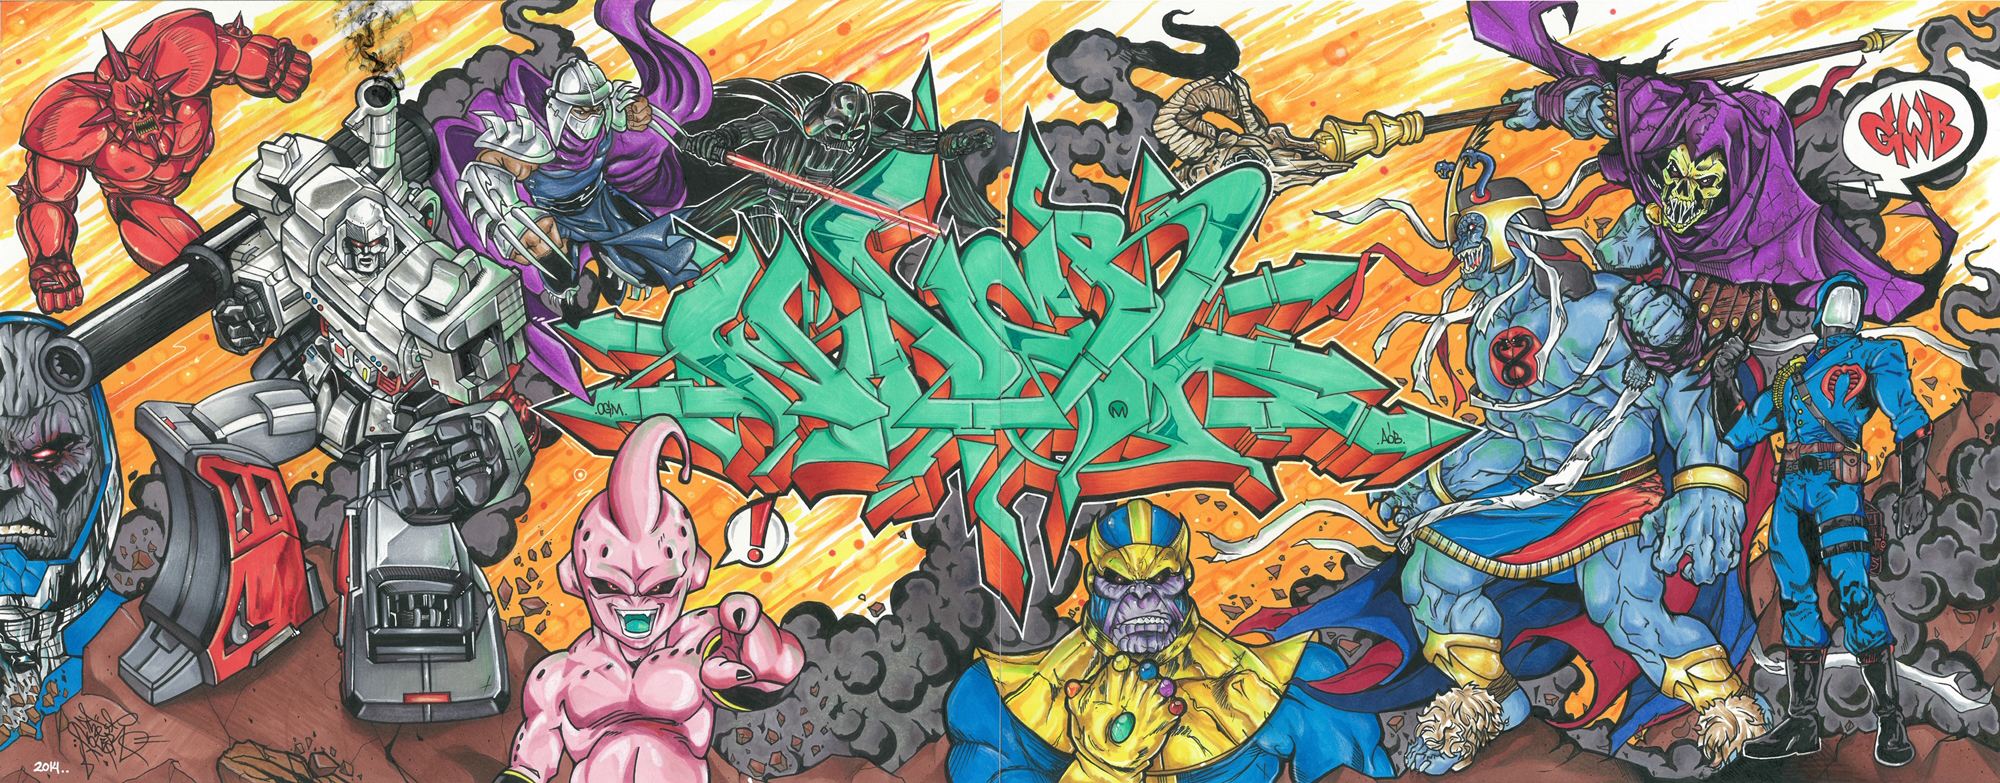 Greatest Villains by Nover, markers & pen on paper, 2014. 